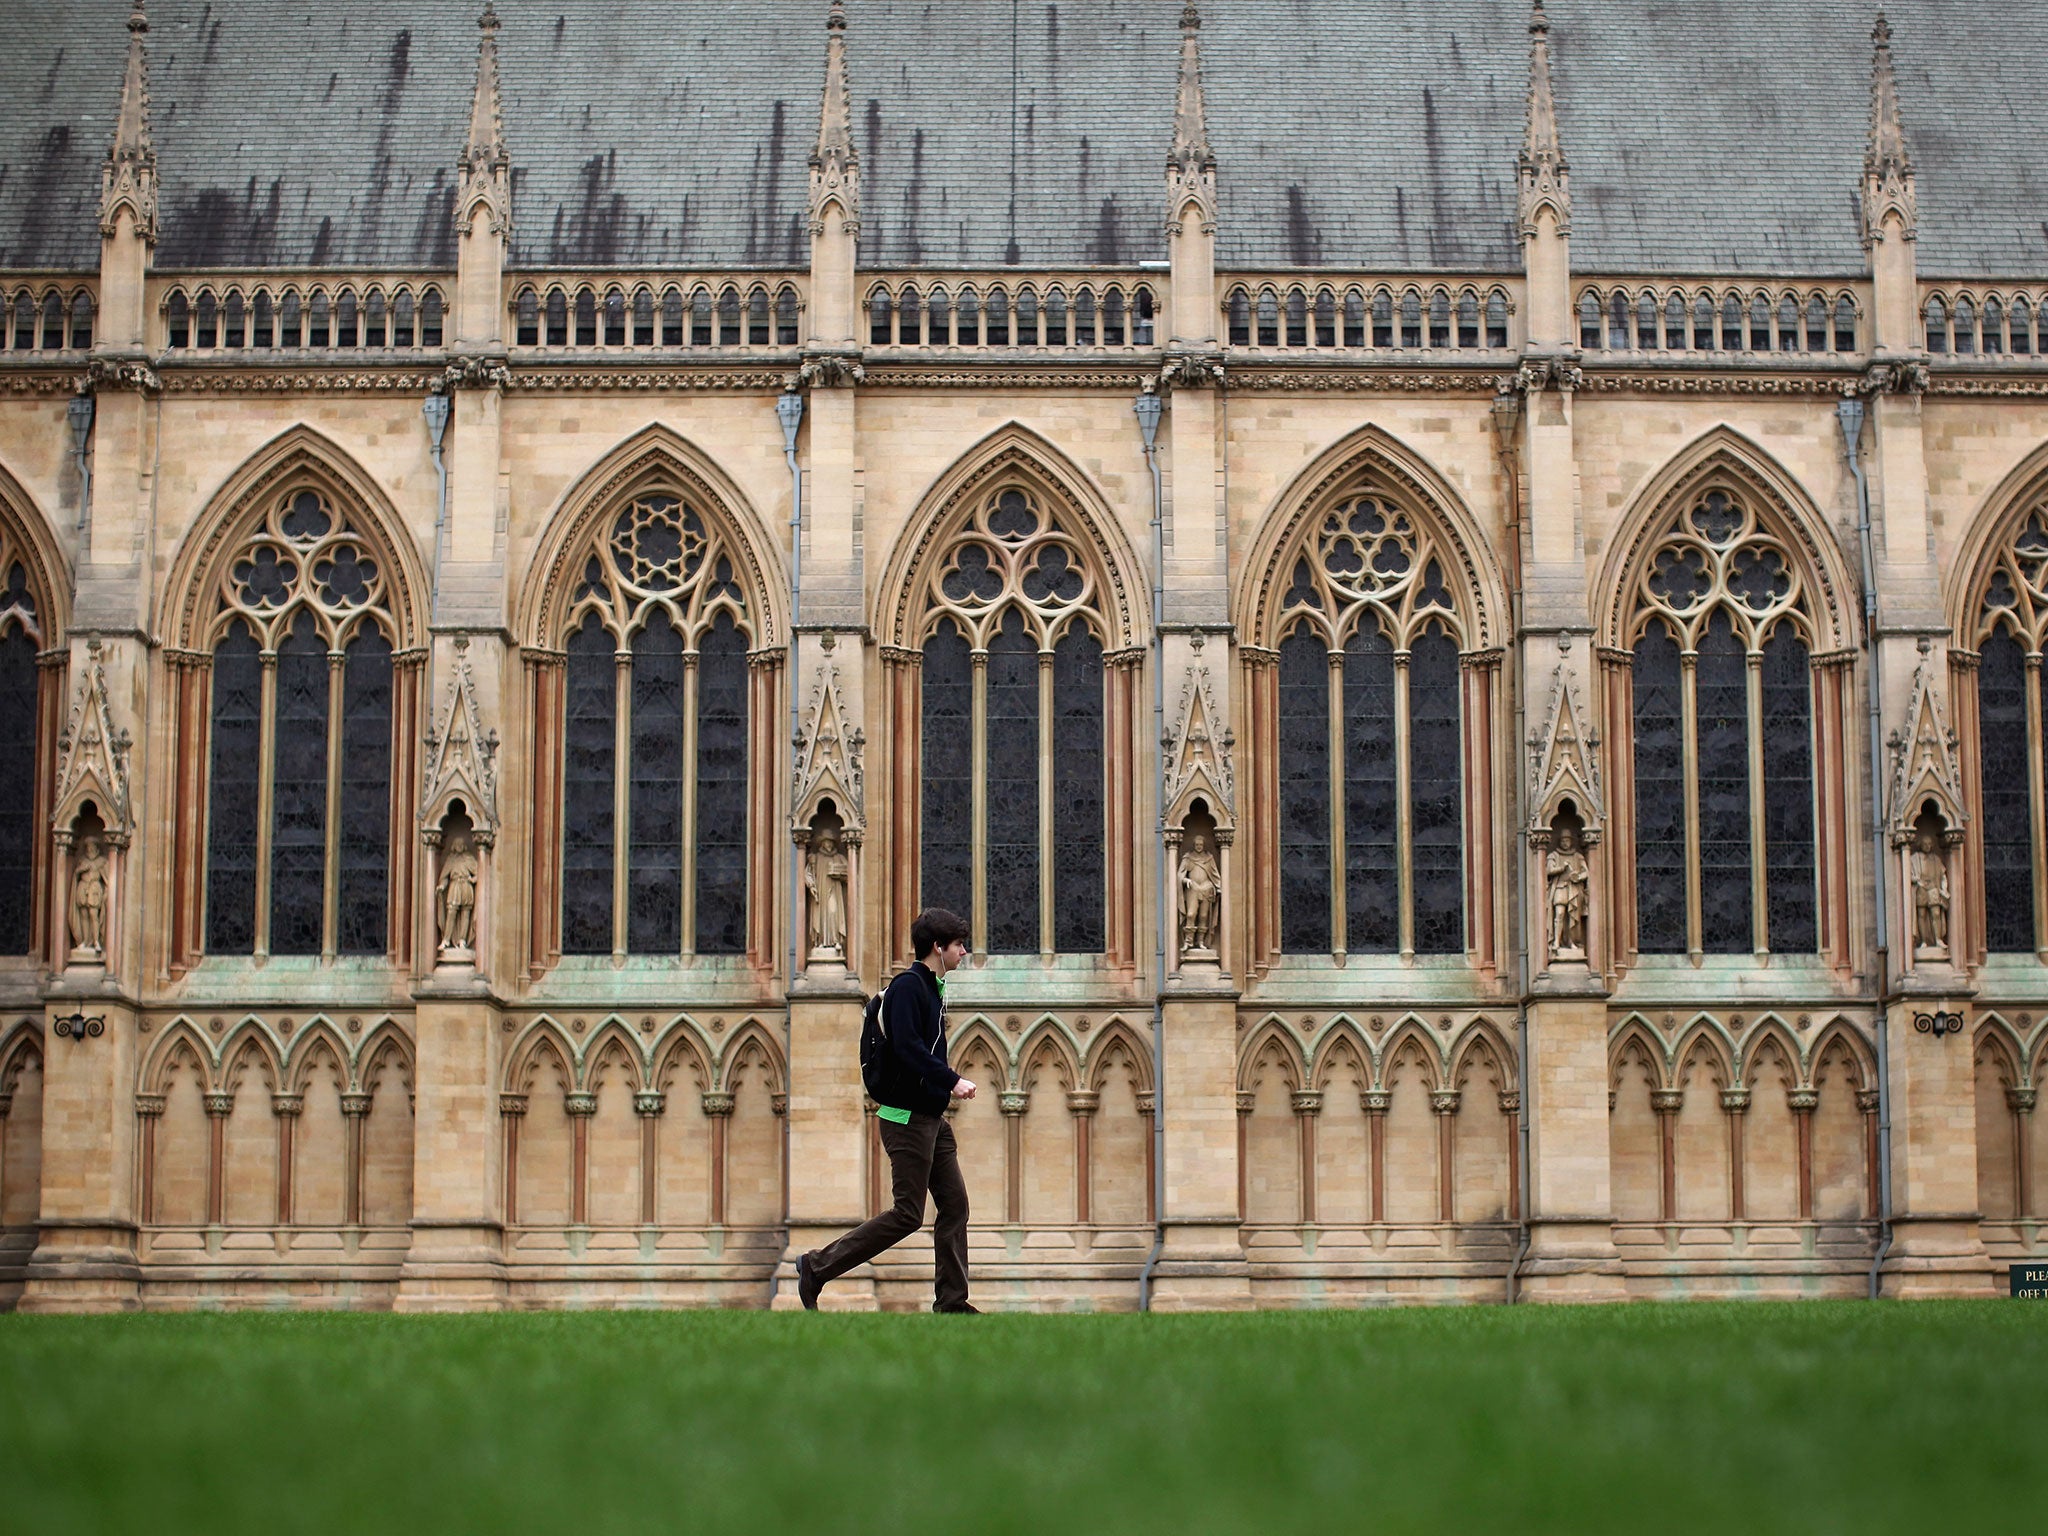 Elite universities in Britain have once again come out on top in world rankings